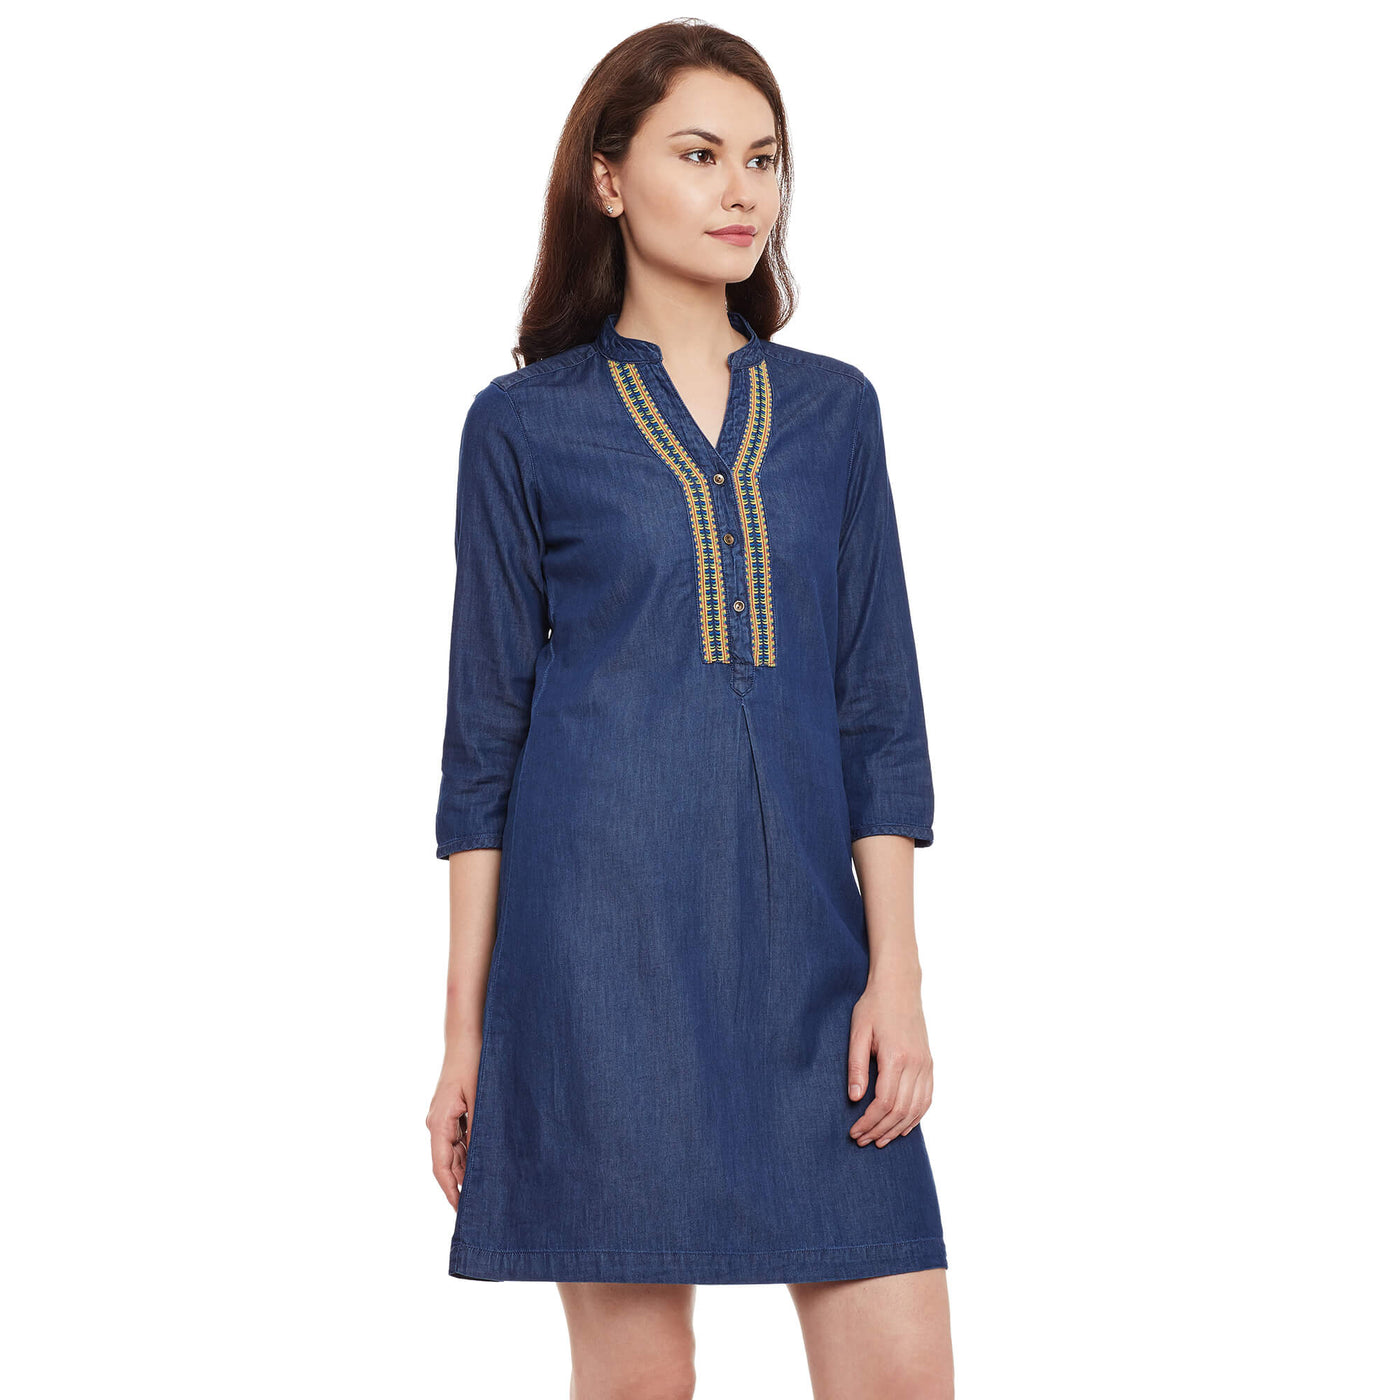 Denim dark wash tunic with 3/4th sleeves and embroidery around  slim collar placket